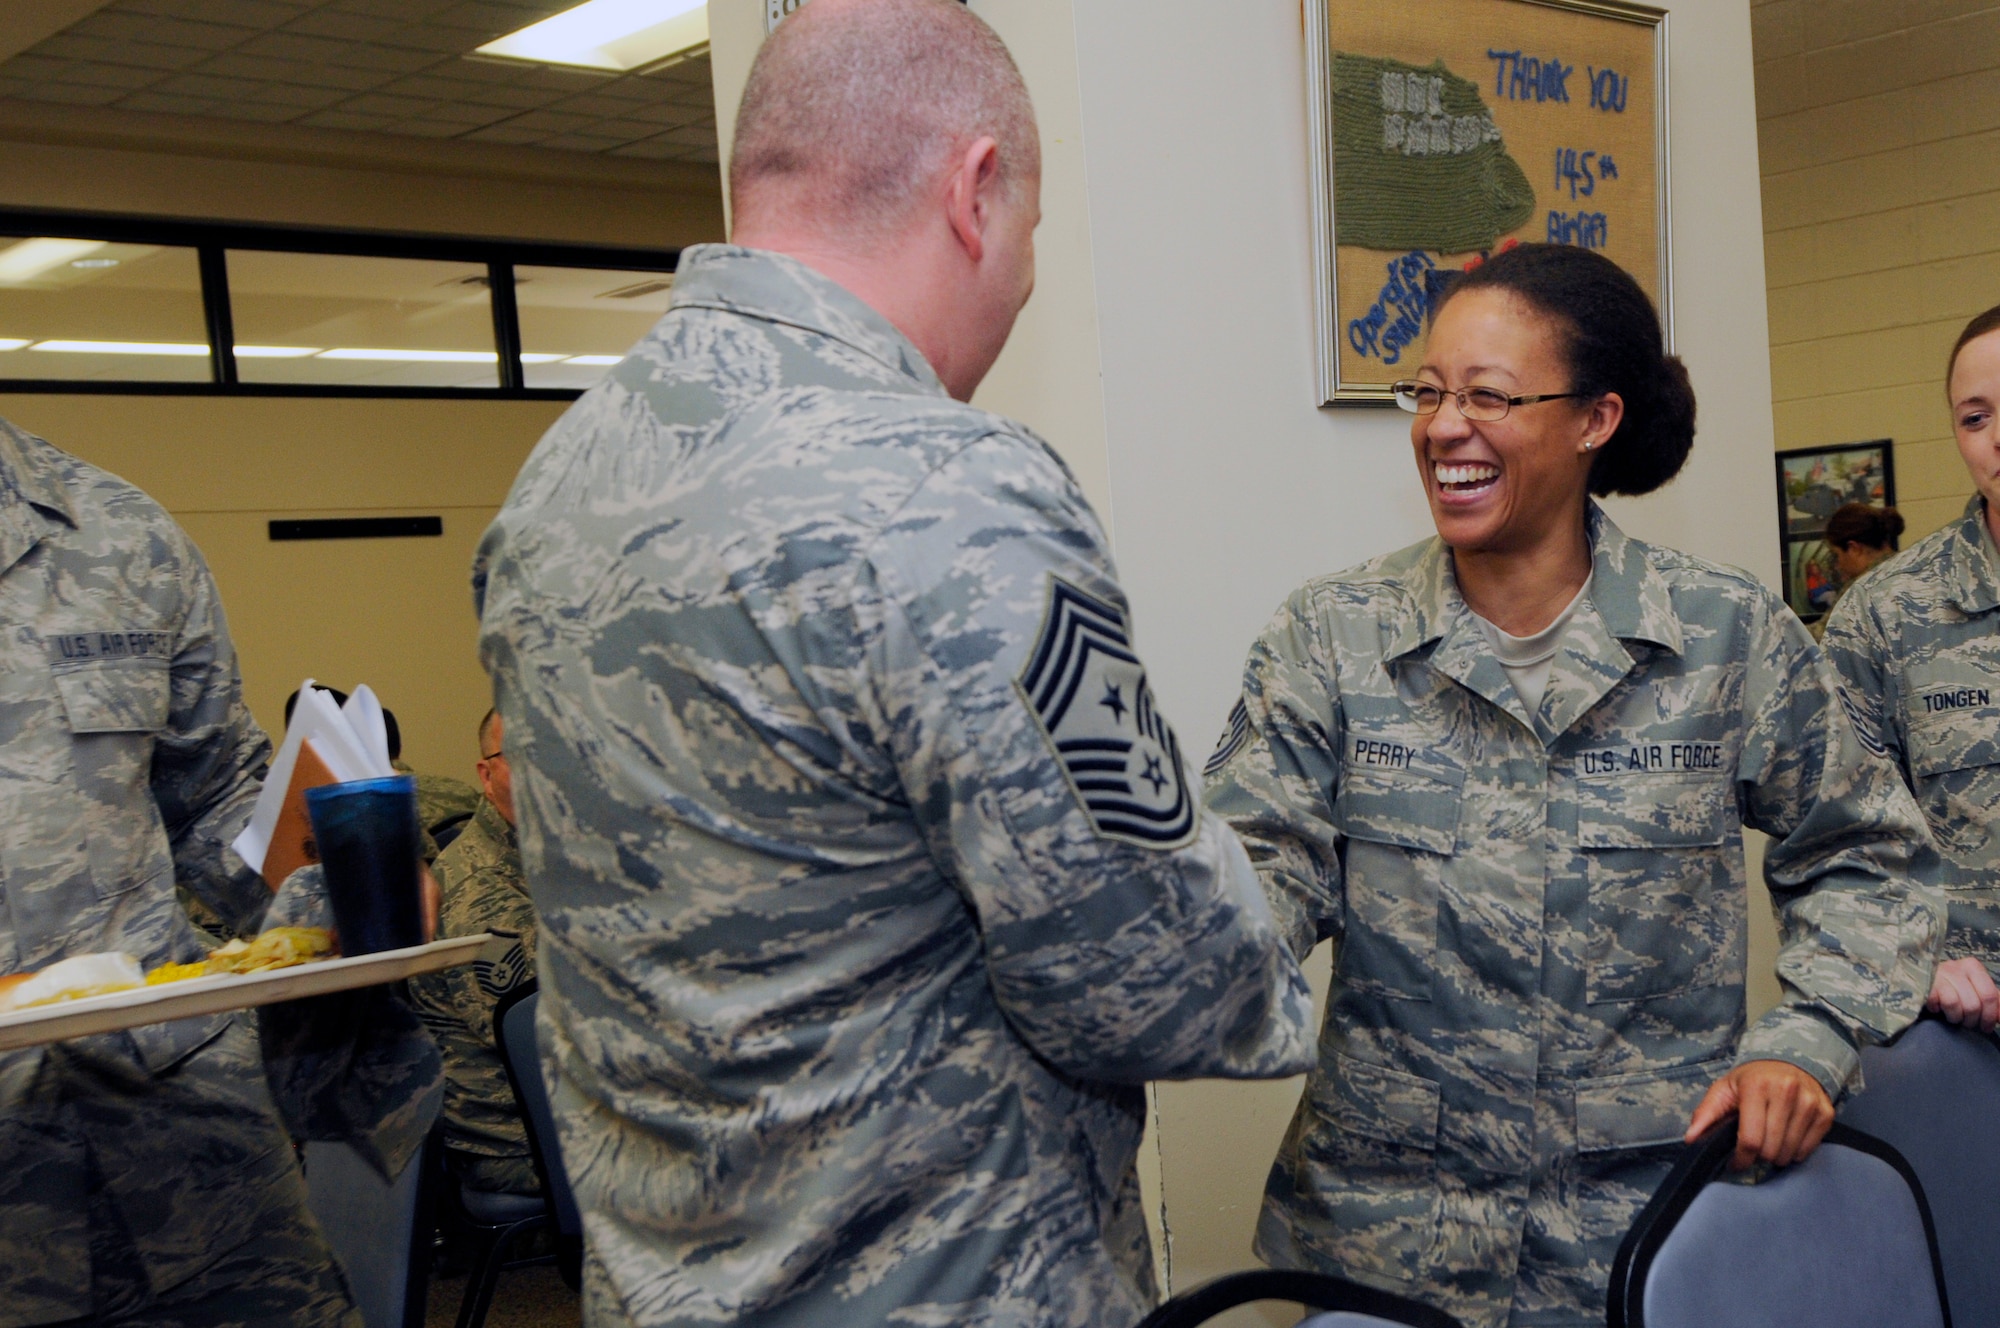 U.S. Air Force Tech. Sgt. Carissa Perry (right), 145th Communications Flight cyber systems operations, shakes hands with Command Chief Master Sergeant of the Air National Guard James W. Hotaling during a lunch with Airmen at the North Carolina Air National Guard Base, Charlotte Douglas International Airport, March 12, 2016. Hotaling gave advice on how to be successful, and talked about his focus on renewing the profession of arms. (U.S. Air National Guard photo by Staff Sgt. Julianne M. Showalter/Released)